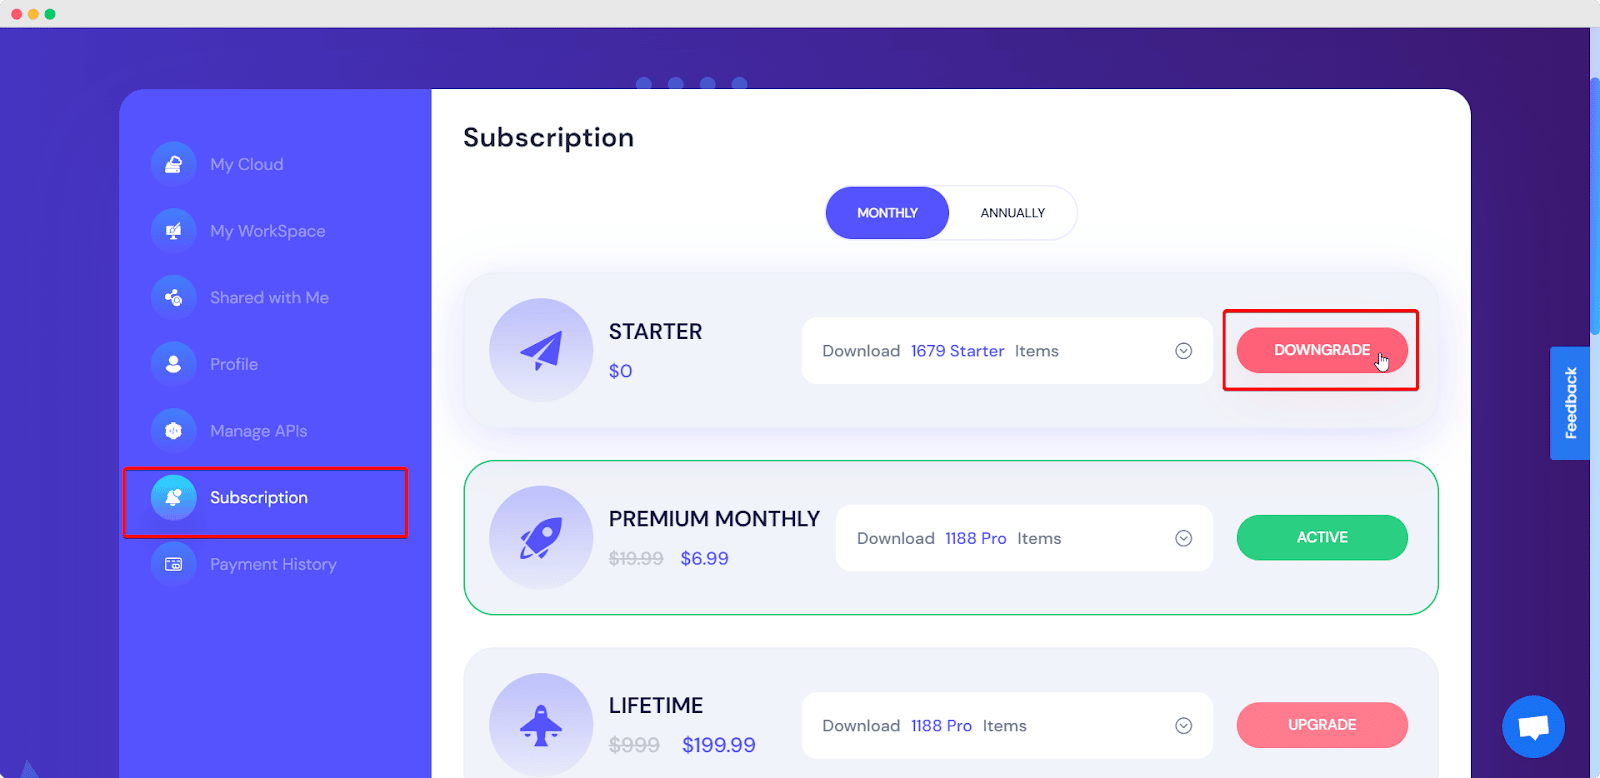 OWNGRADE CURRENT SUBSCRIPTION PLAN FOR TEMPLATELY